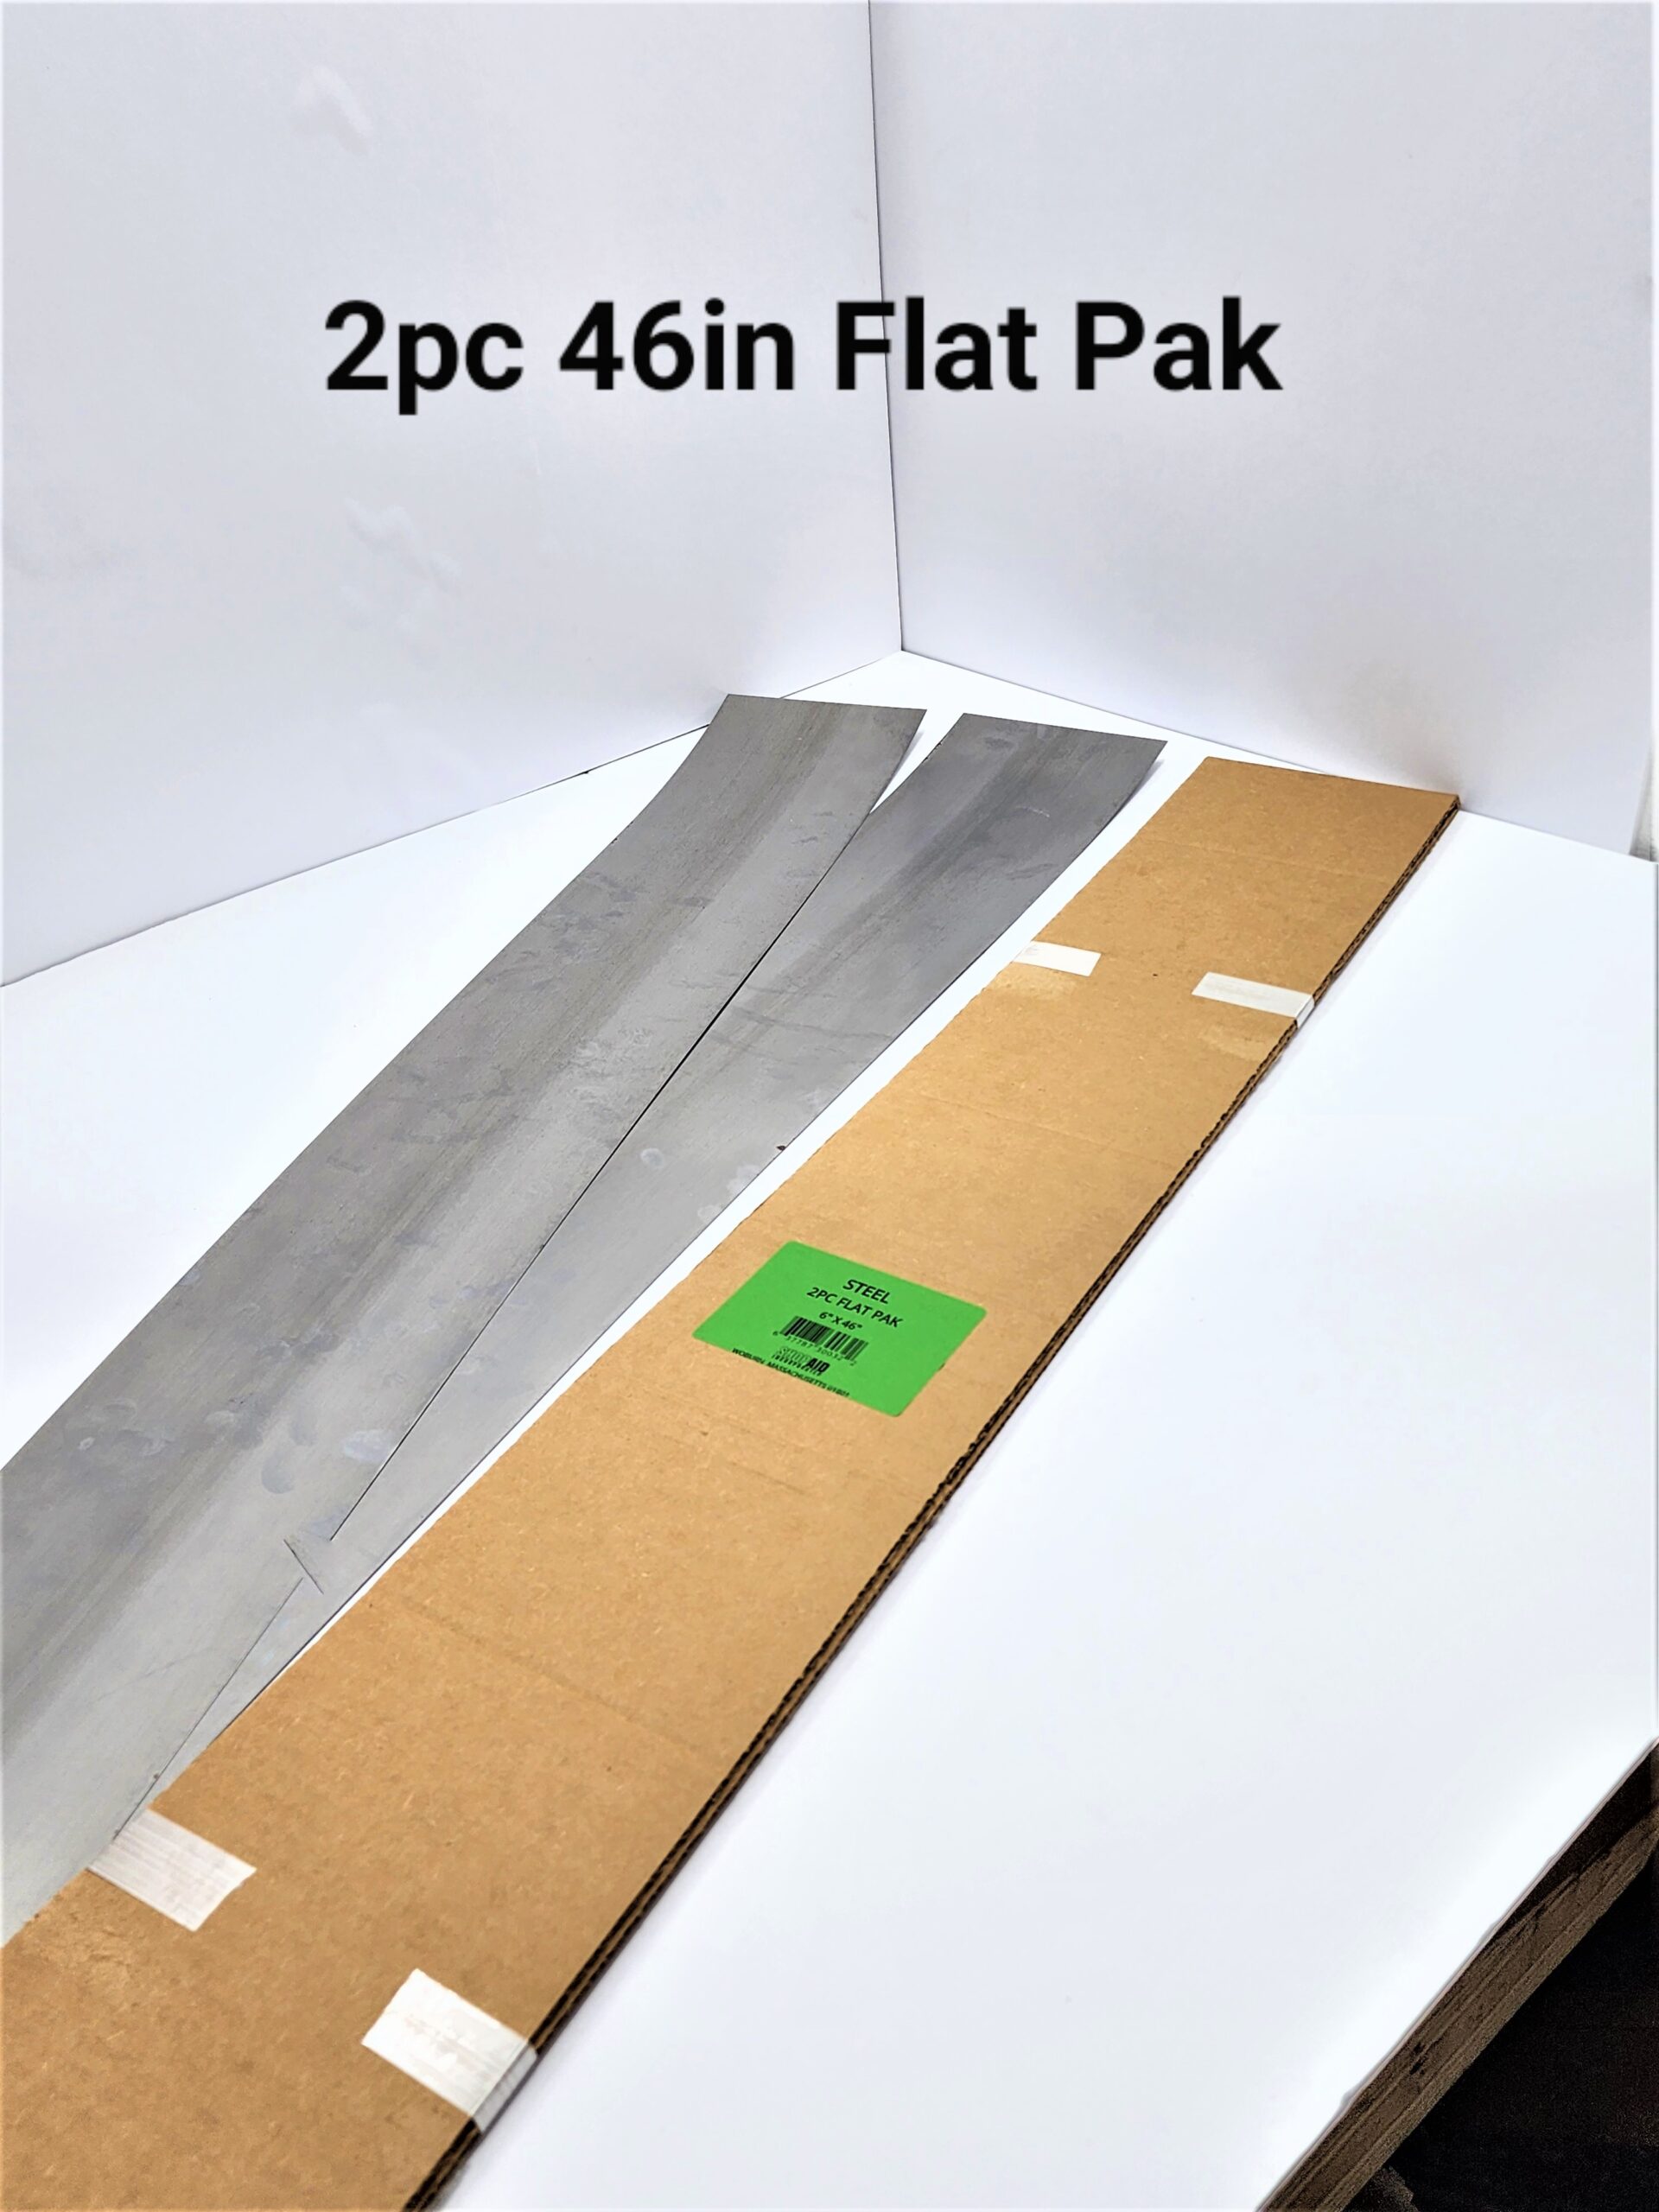 Tools and Supplies New Steel Flat Pak